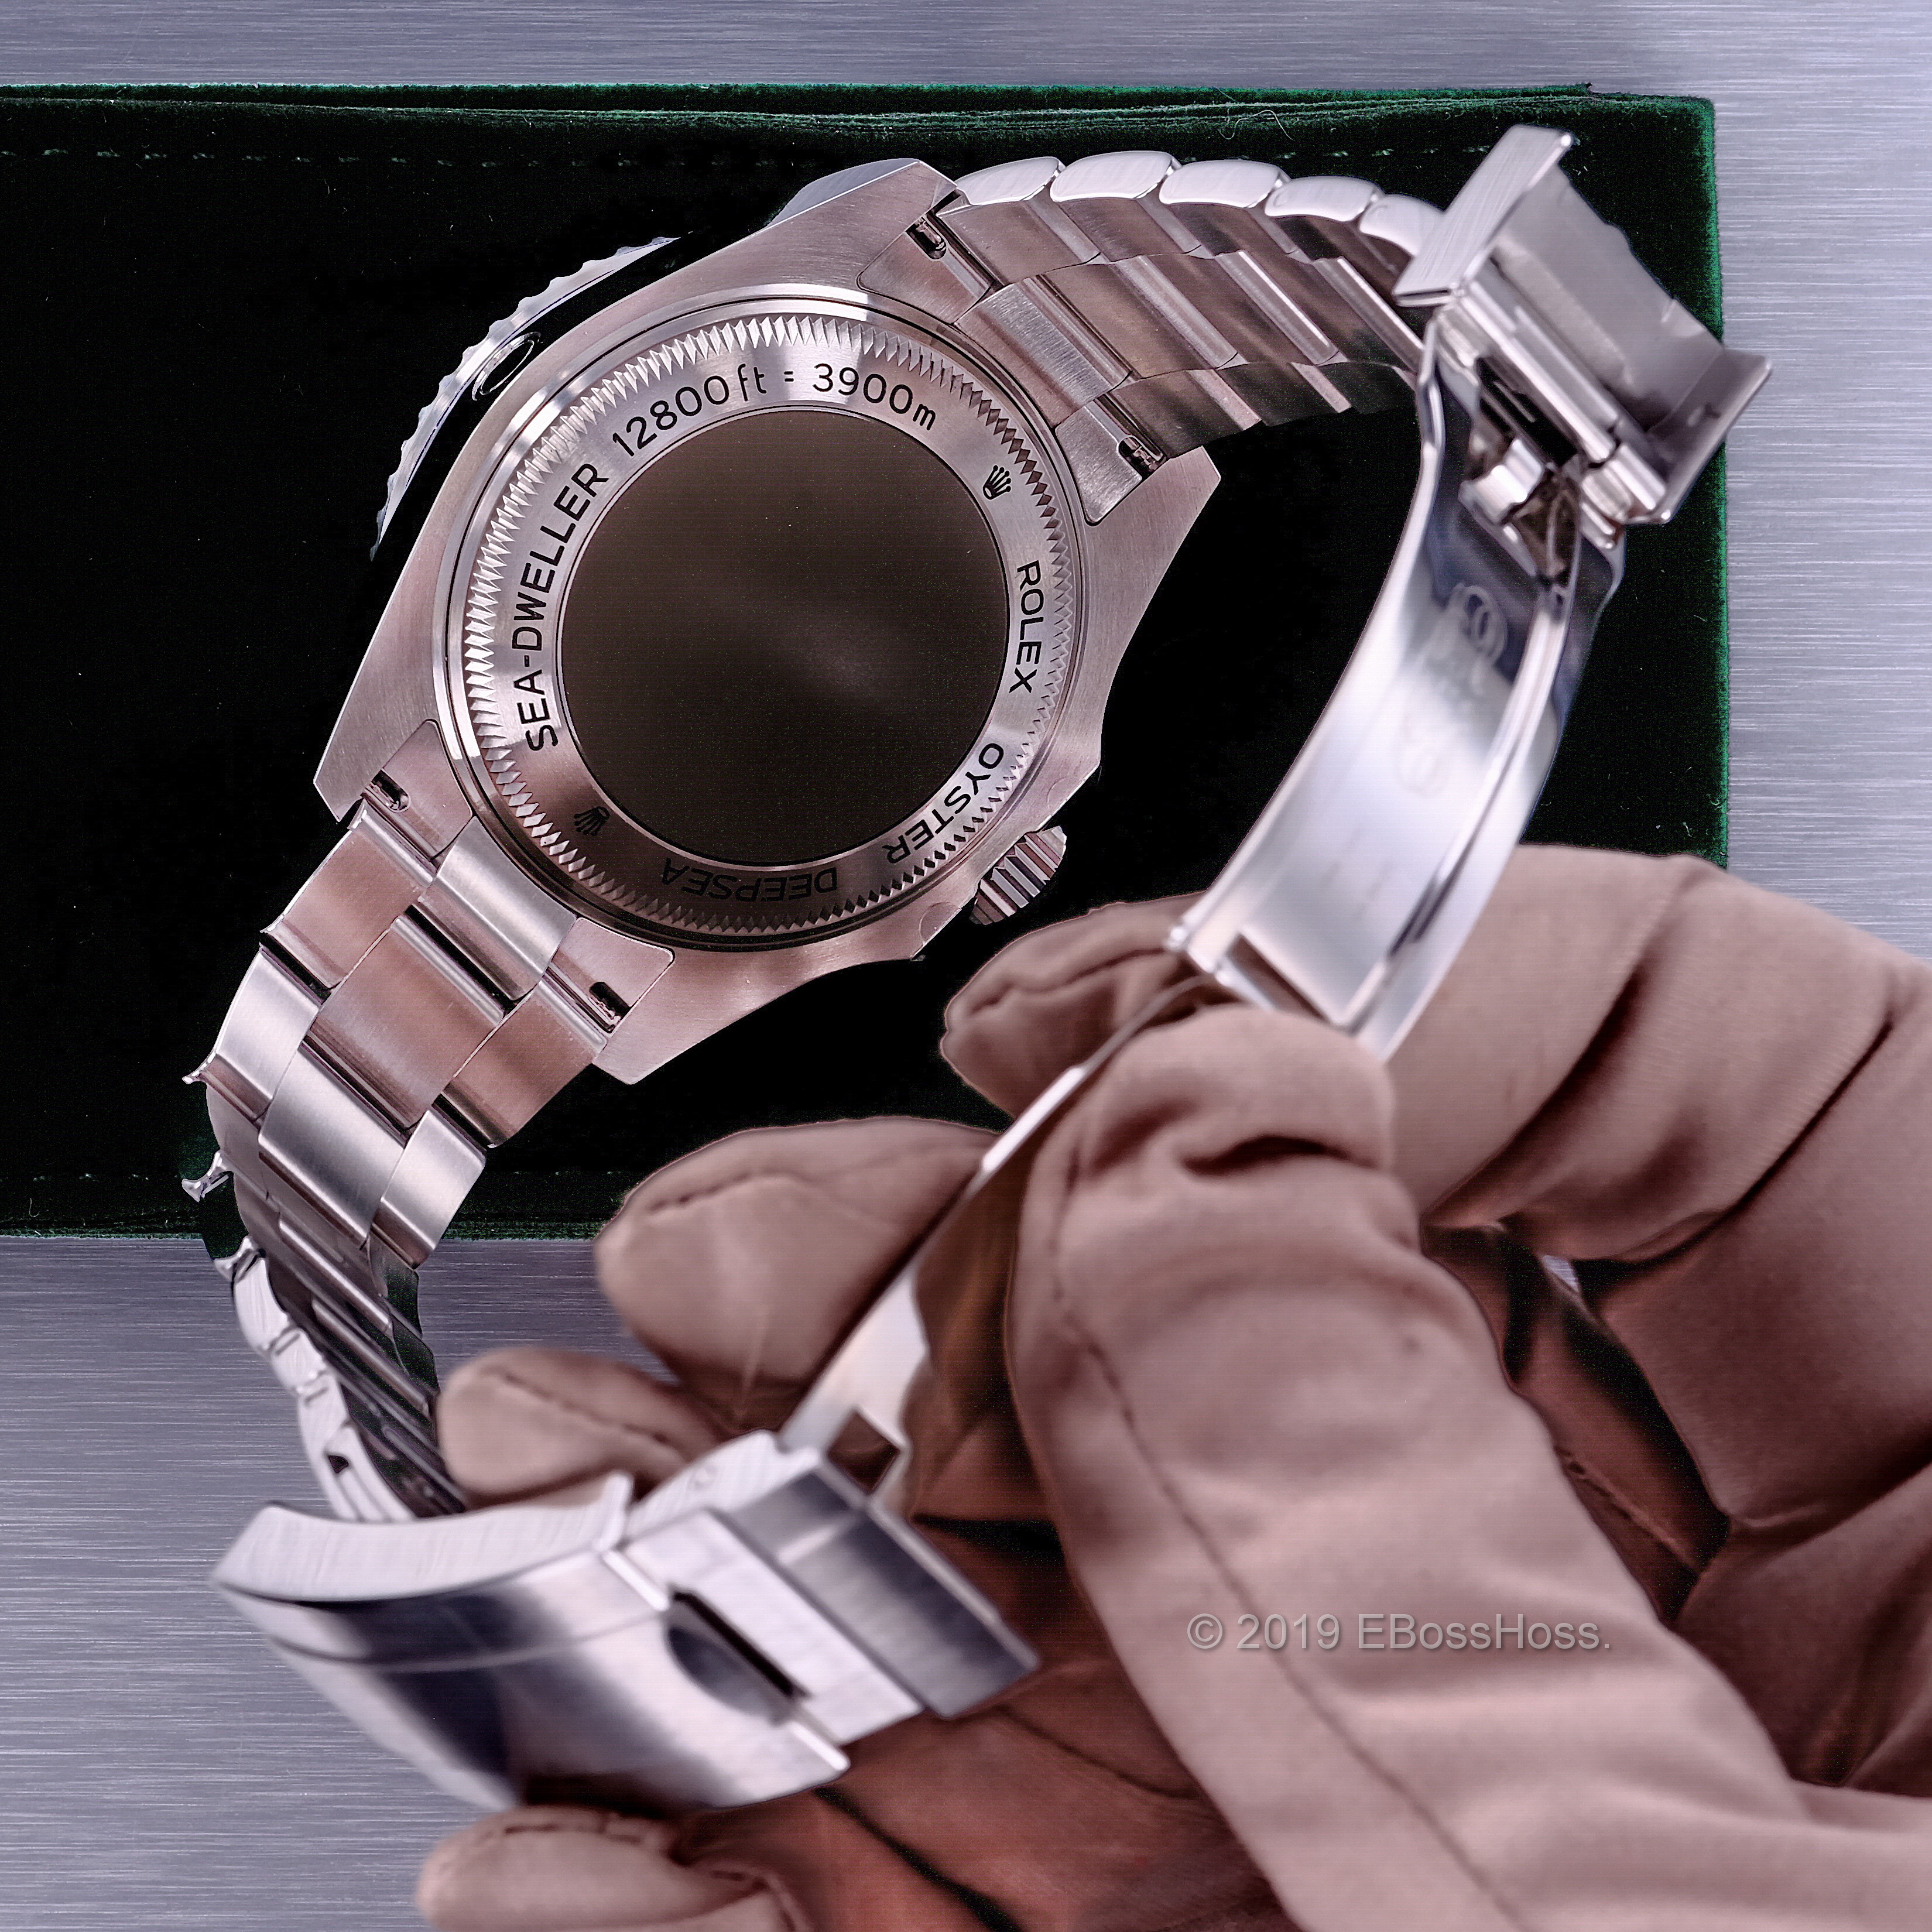 Late 2019 so Redesigned Watch Case, Movement, &amp;  the 97% of the Rolex Warranty Remains!